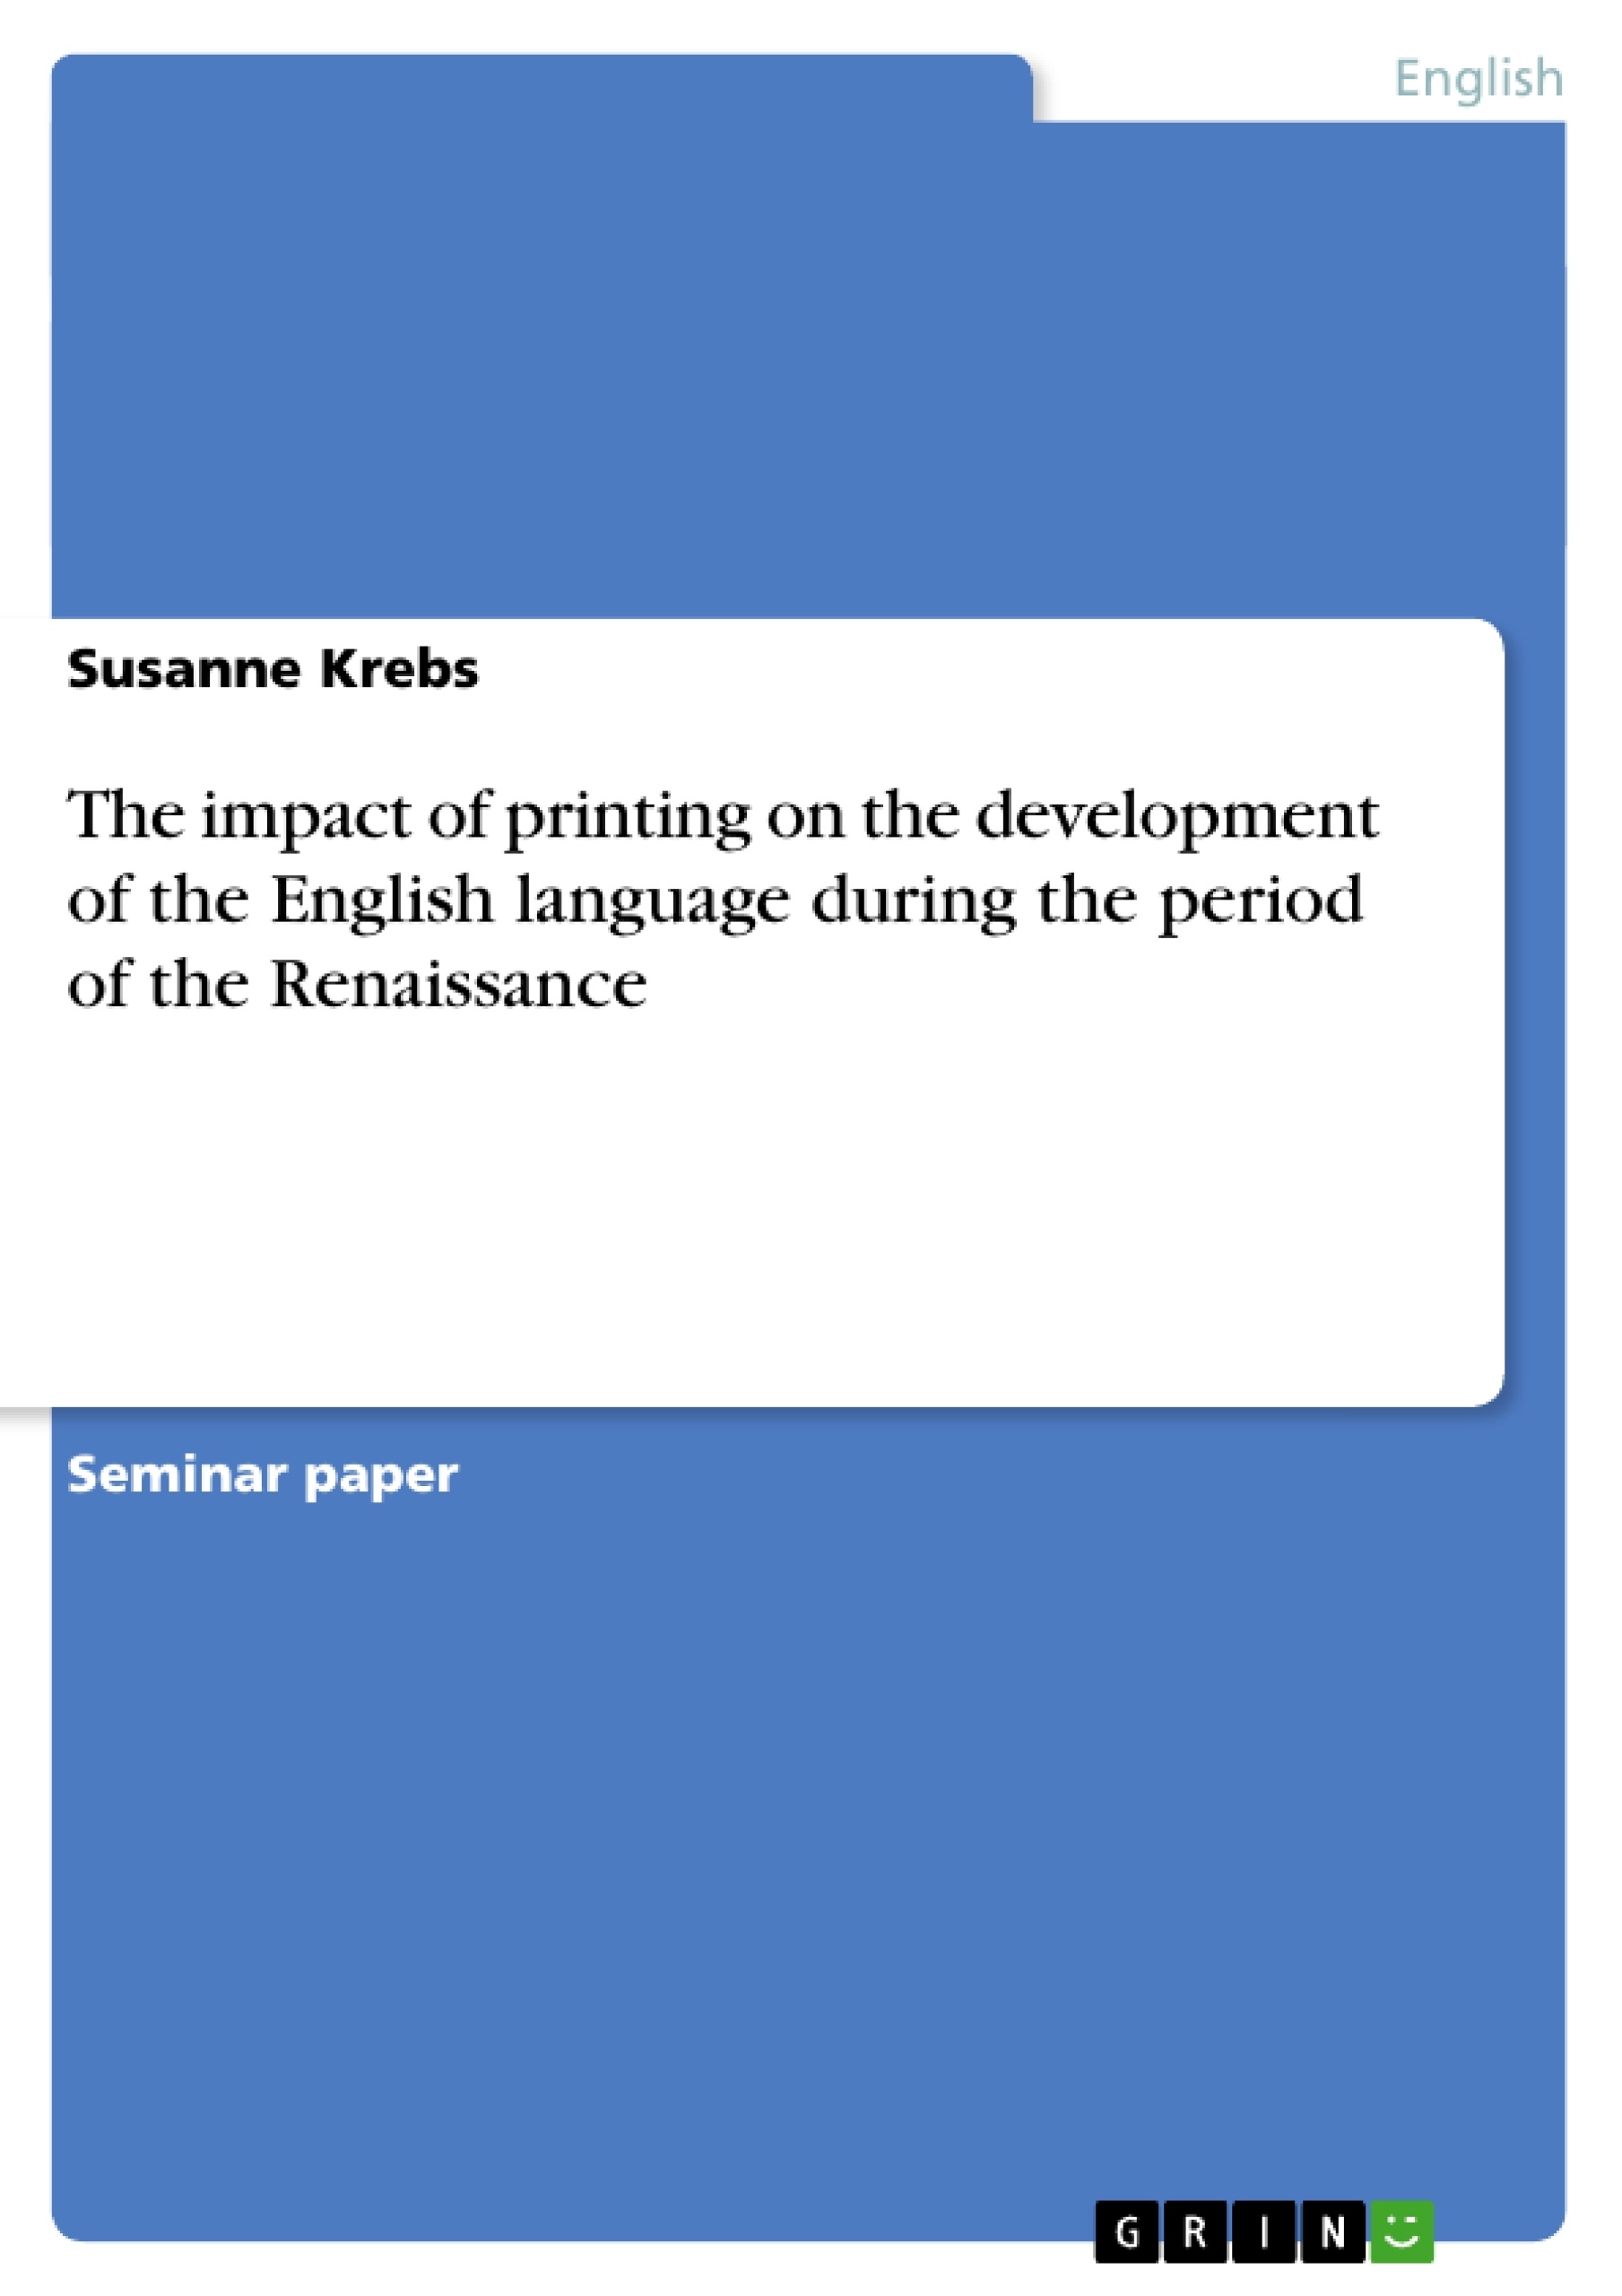 Titel: The impact of printing on the development of the English language during the period of the Renaissance